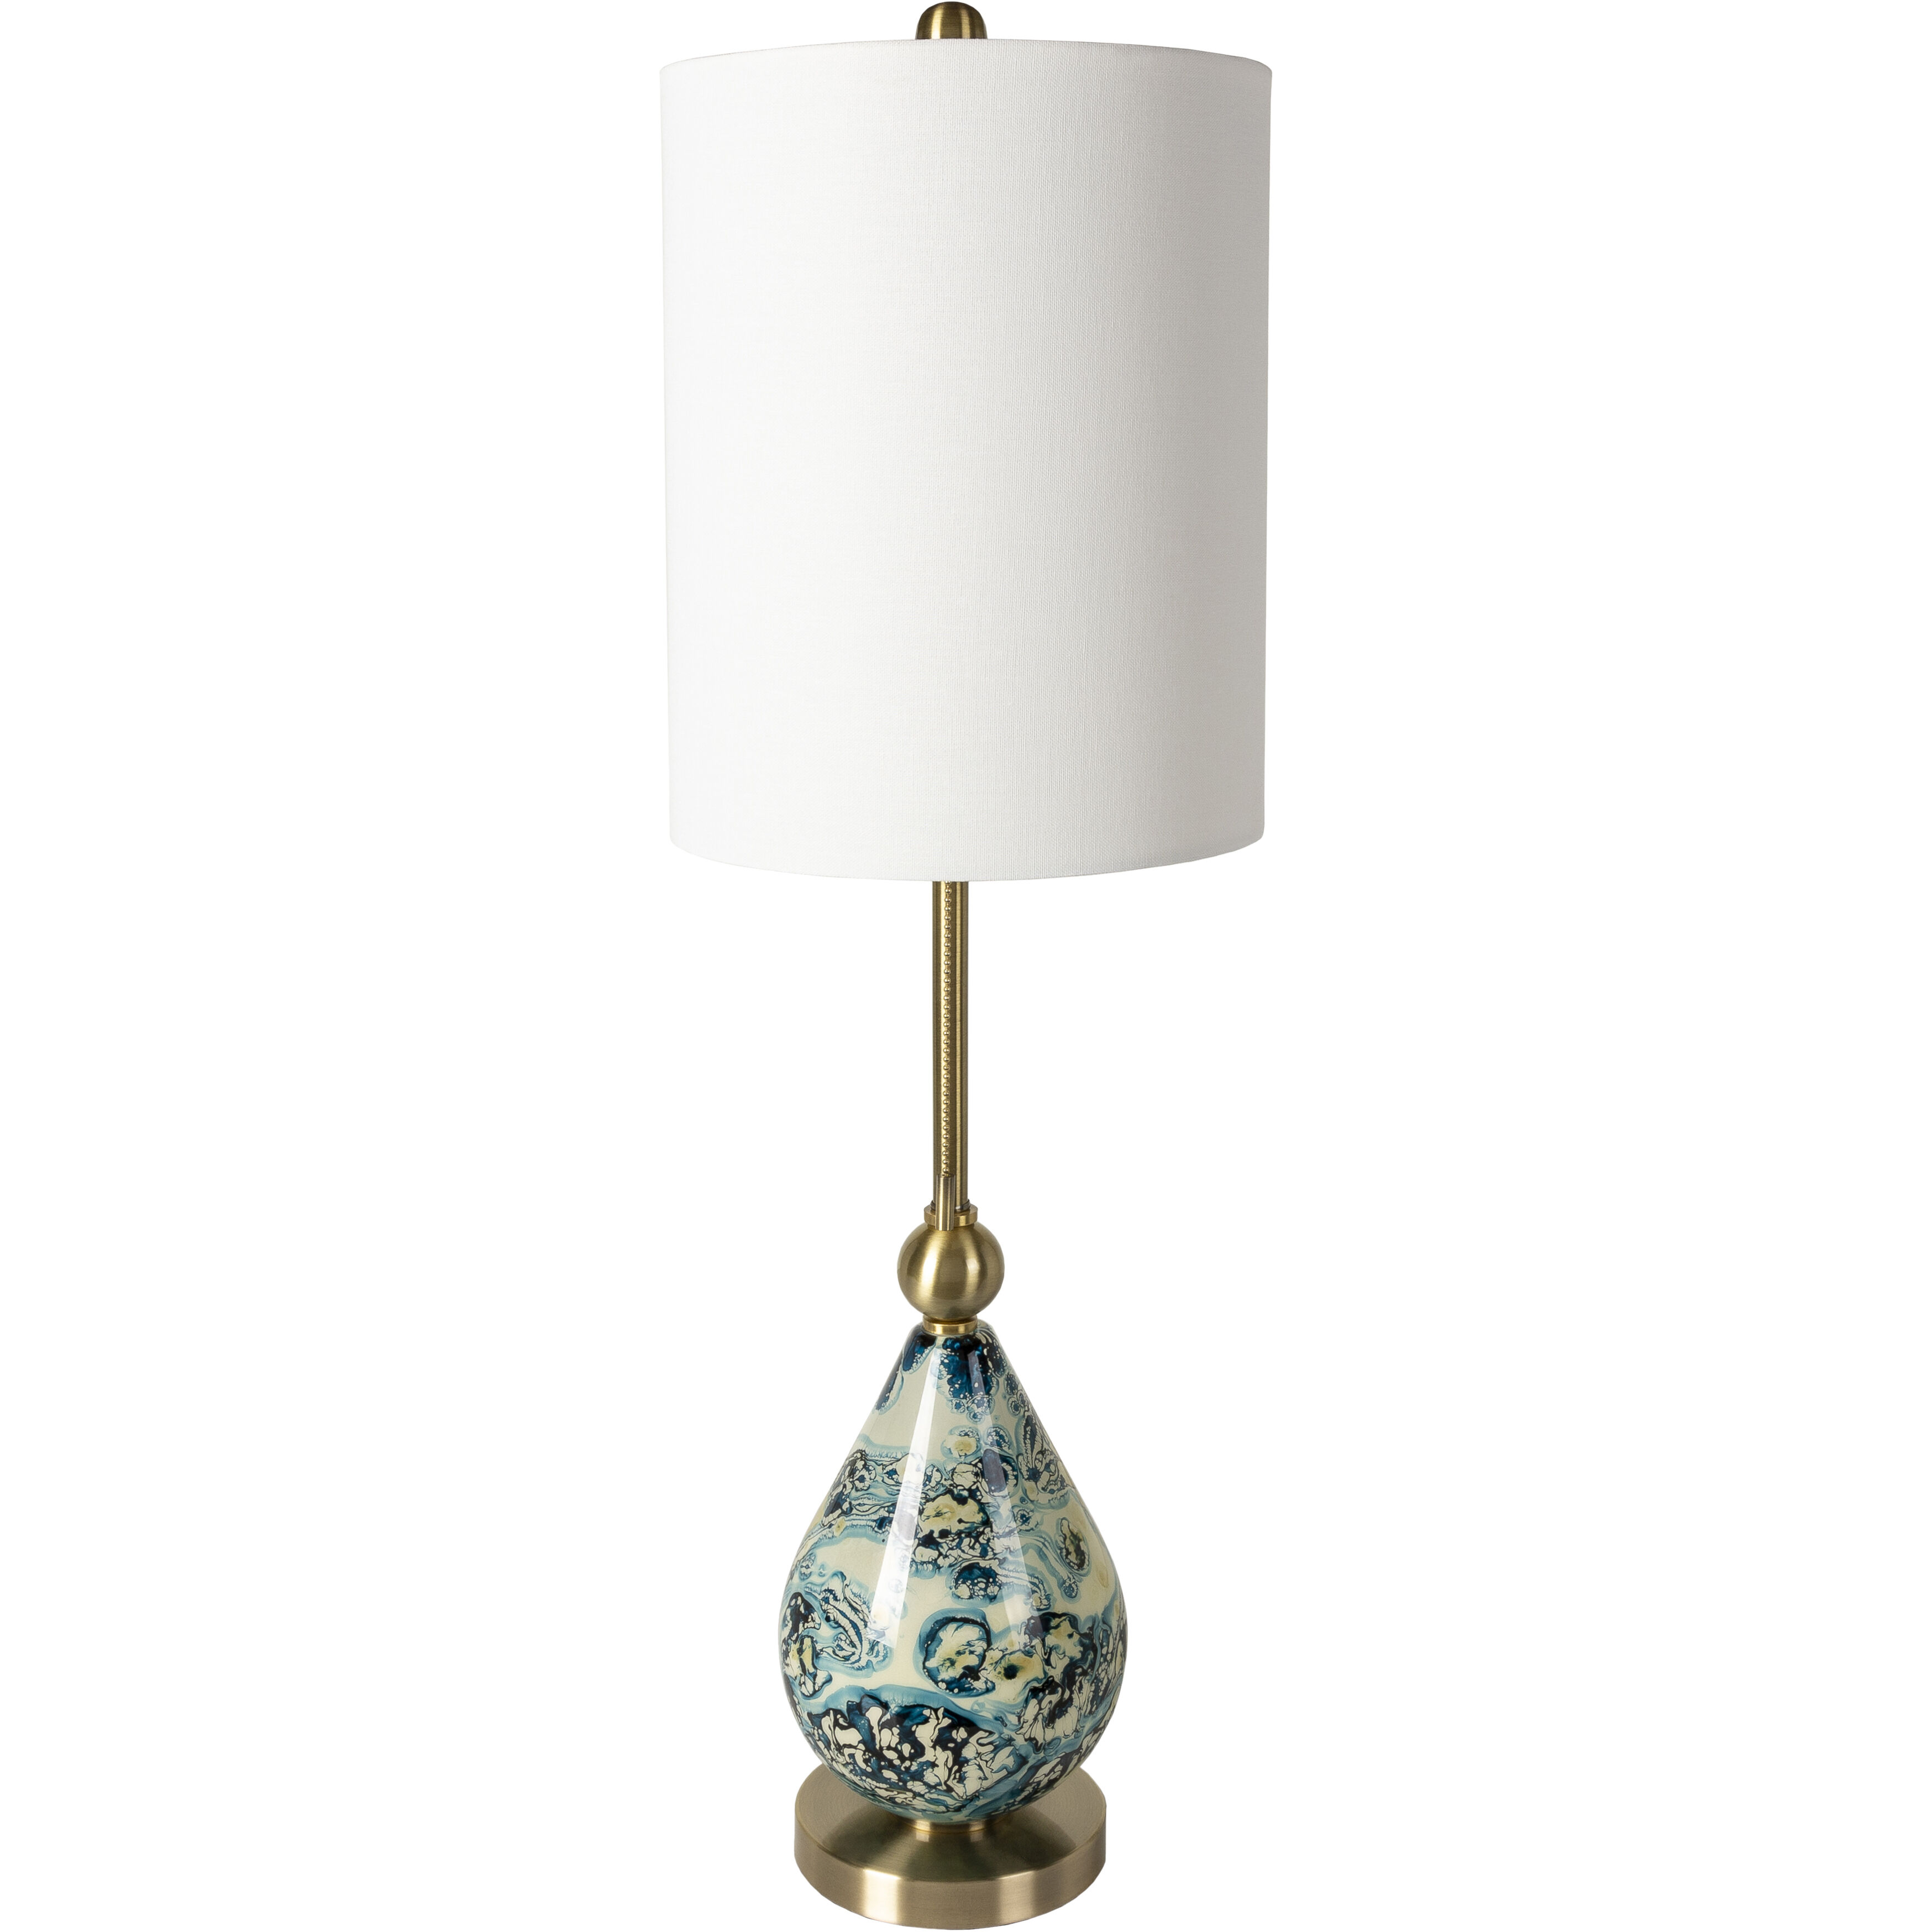 Snicarte Table Lamp